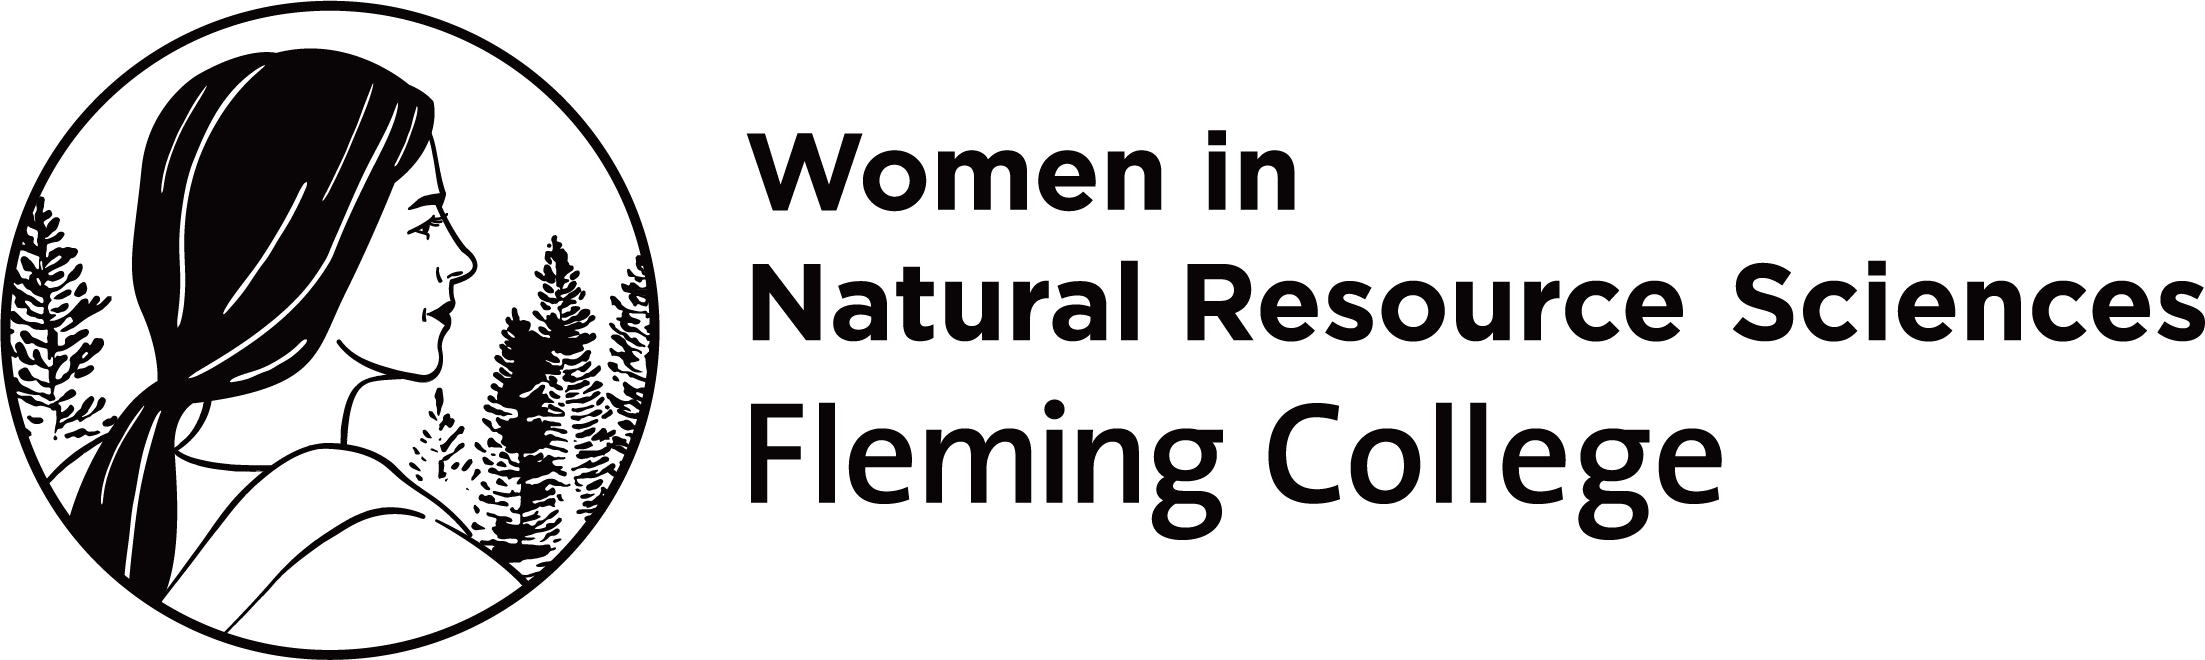 Women in Natural Resources logo - an illustration of a woman